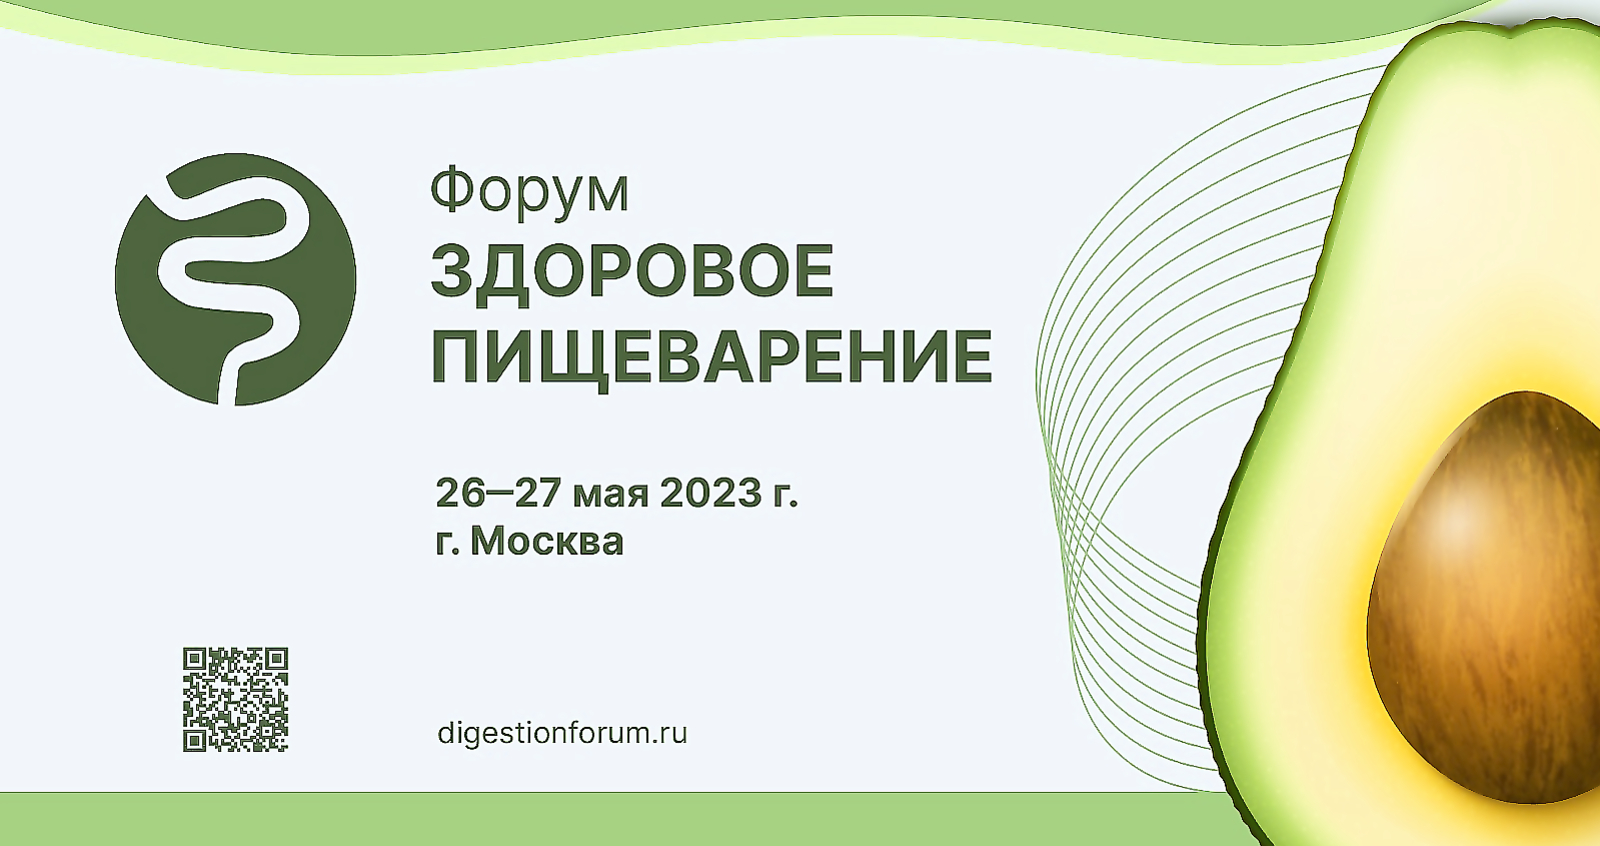 All-Russian Scientific and Practical Forum &#34;Healthy Digestion&#34;